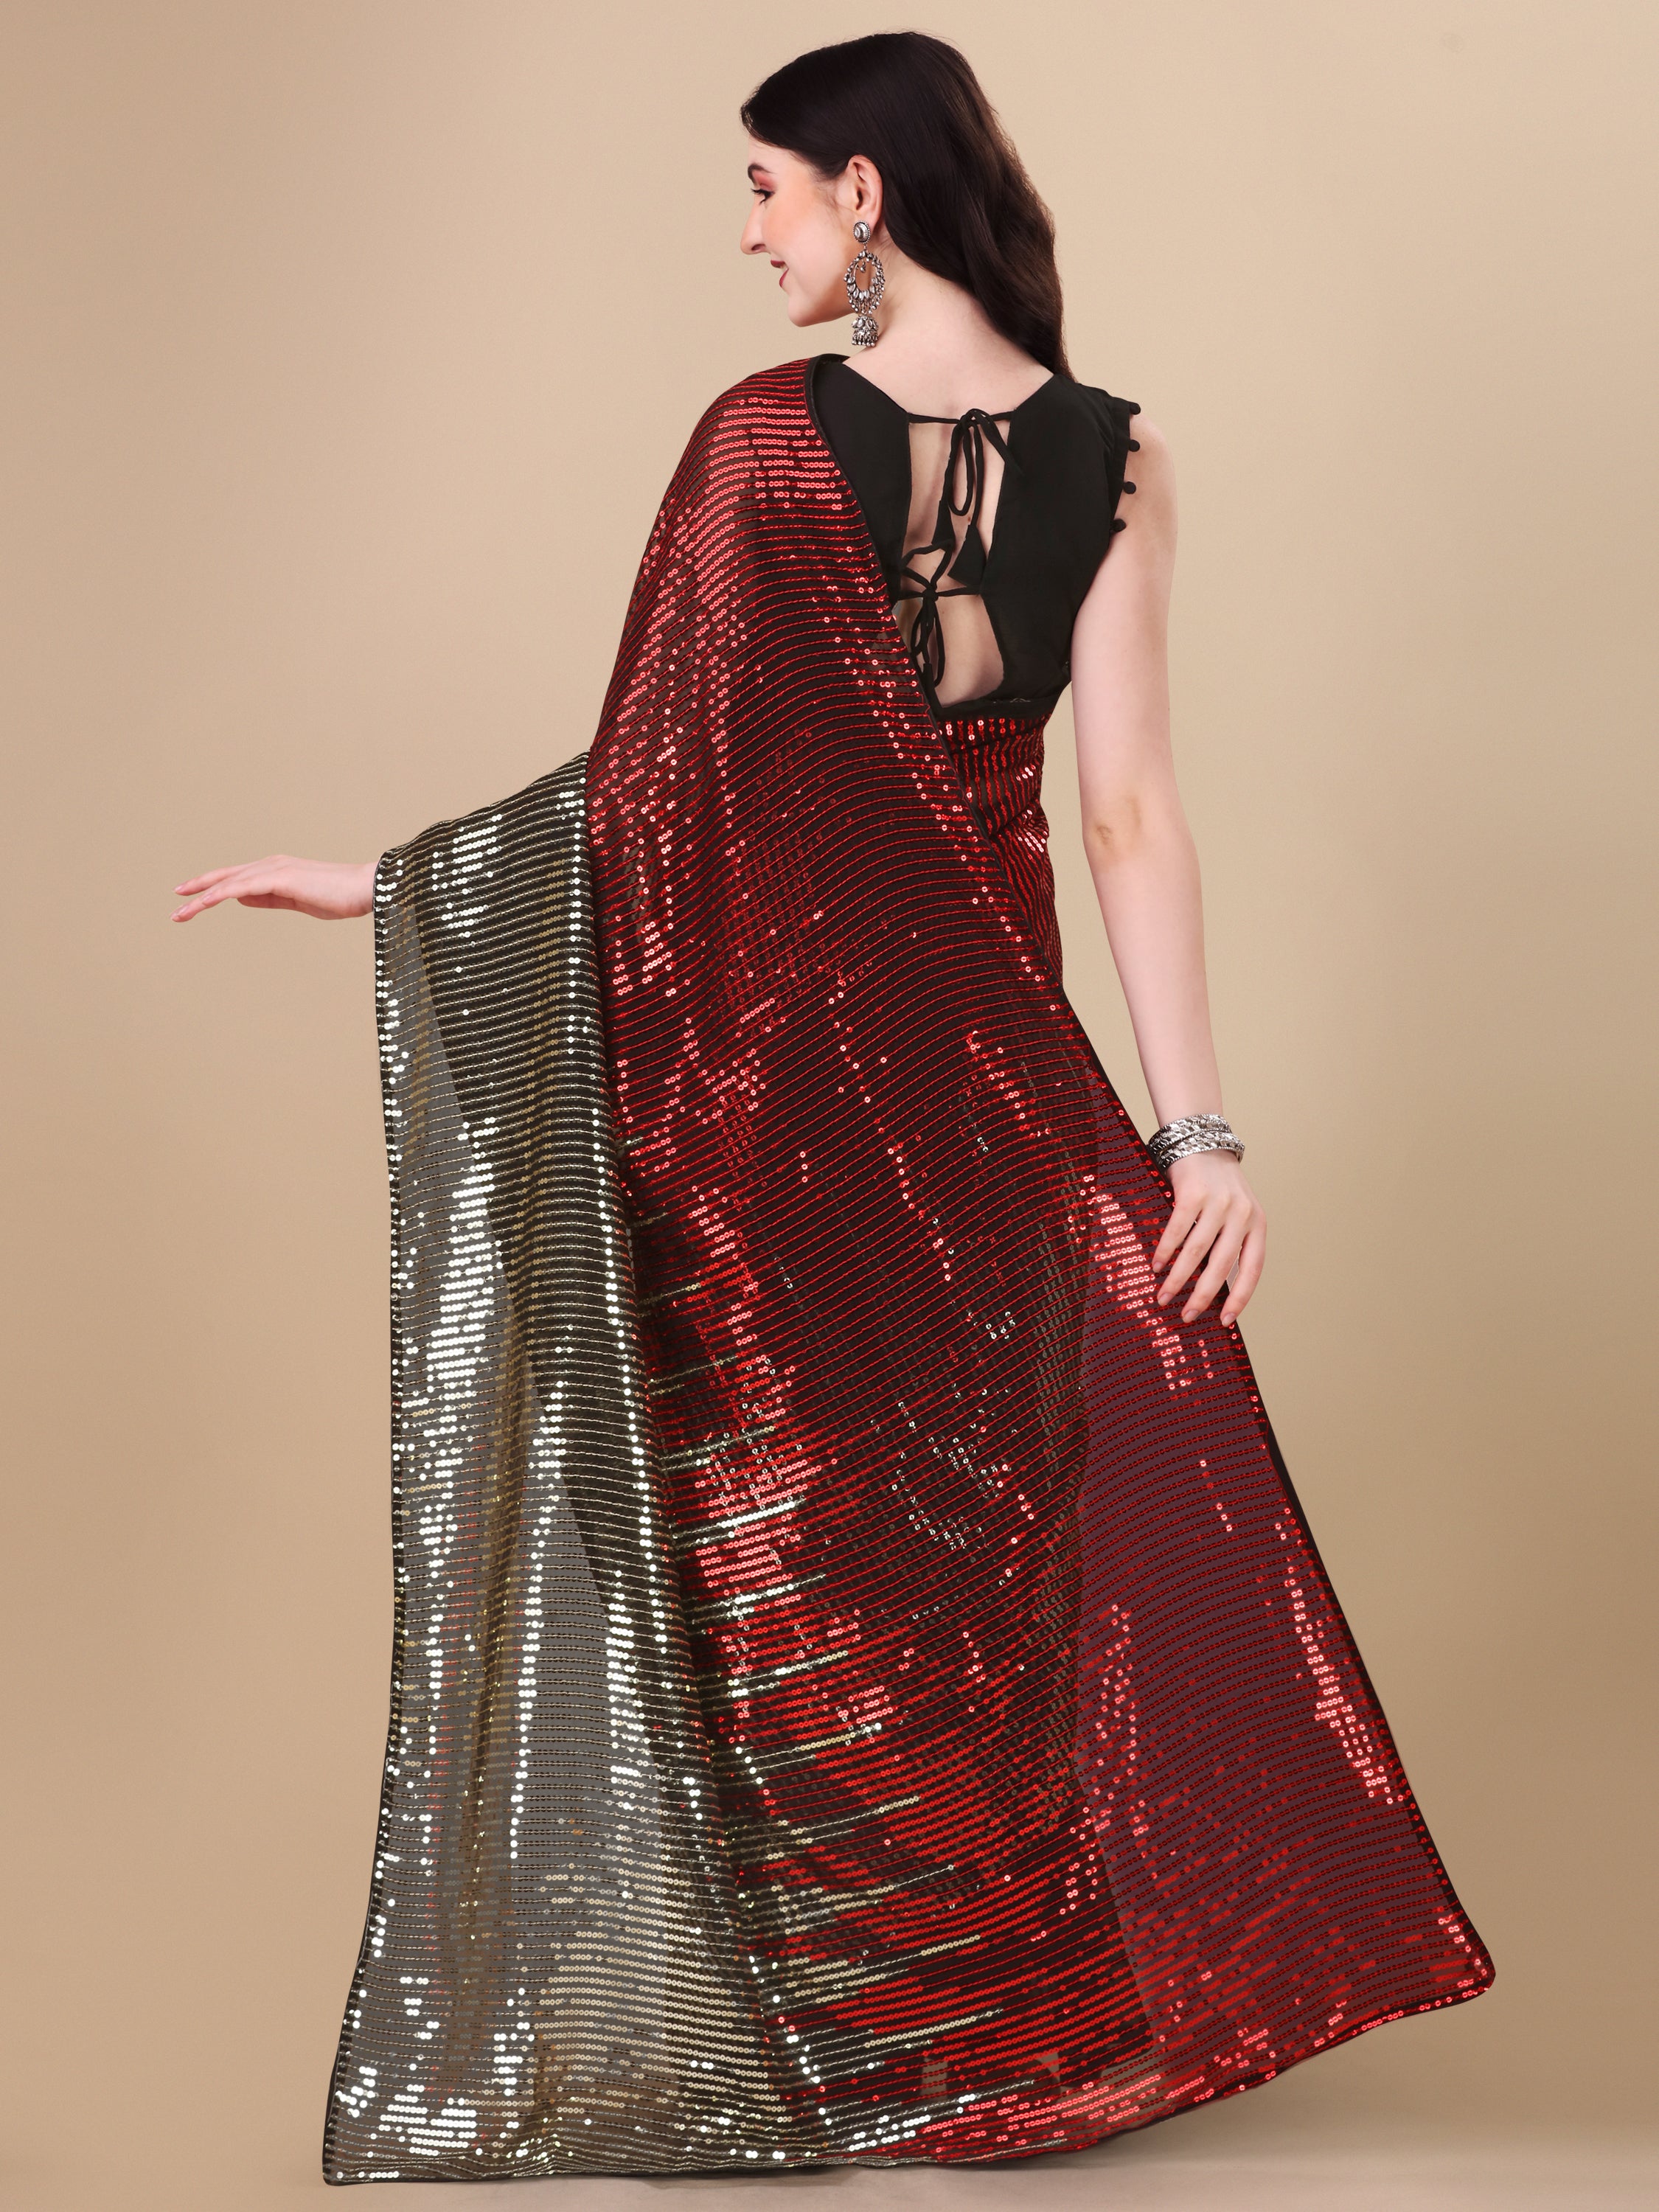 Women's Sequin Striped Paty Wear Contemporary Georgette Saree With Blouse Piece (Maroon) - NIMIDHYA